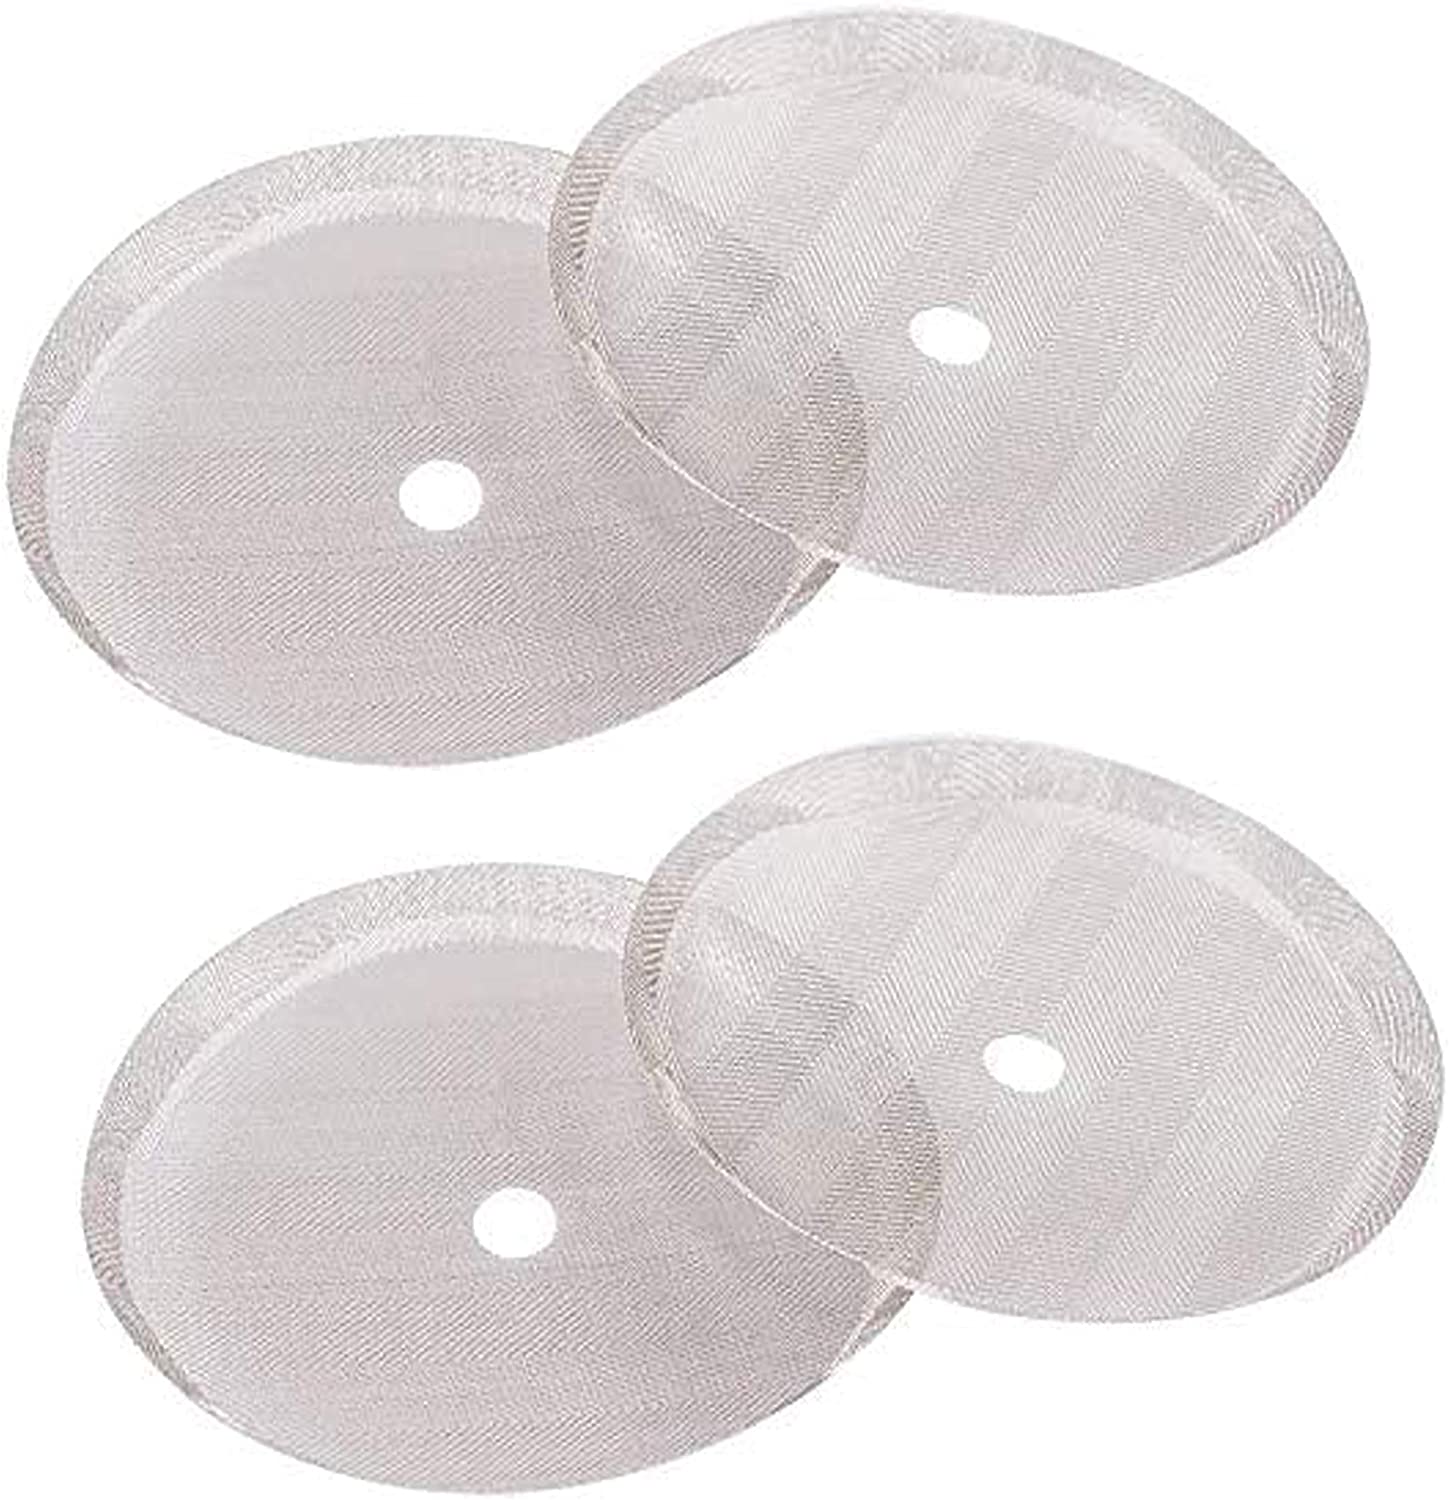 MeelioCafe Coffee Press Filter Replacement Filter Sieve for Coffee Press Strainer, French Press Strainer, Stainless Steel Mesh Replacement for 350ml/0.35L/3 Cups French Press Coffee Machines 4 Pack